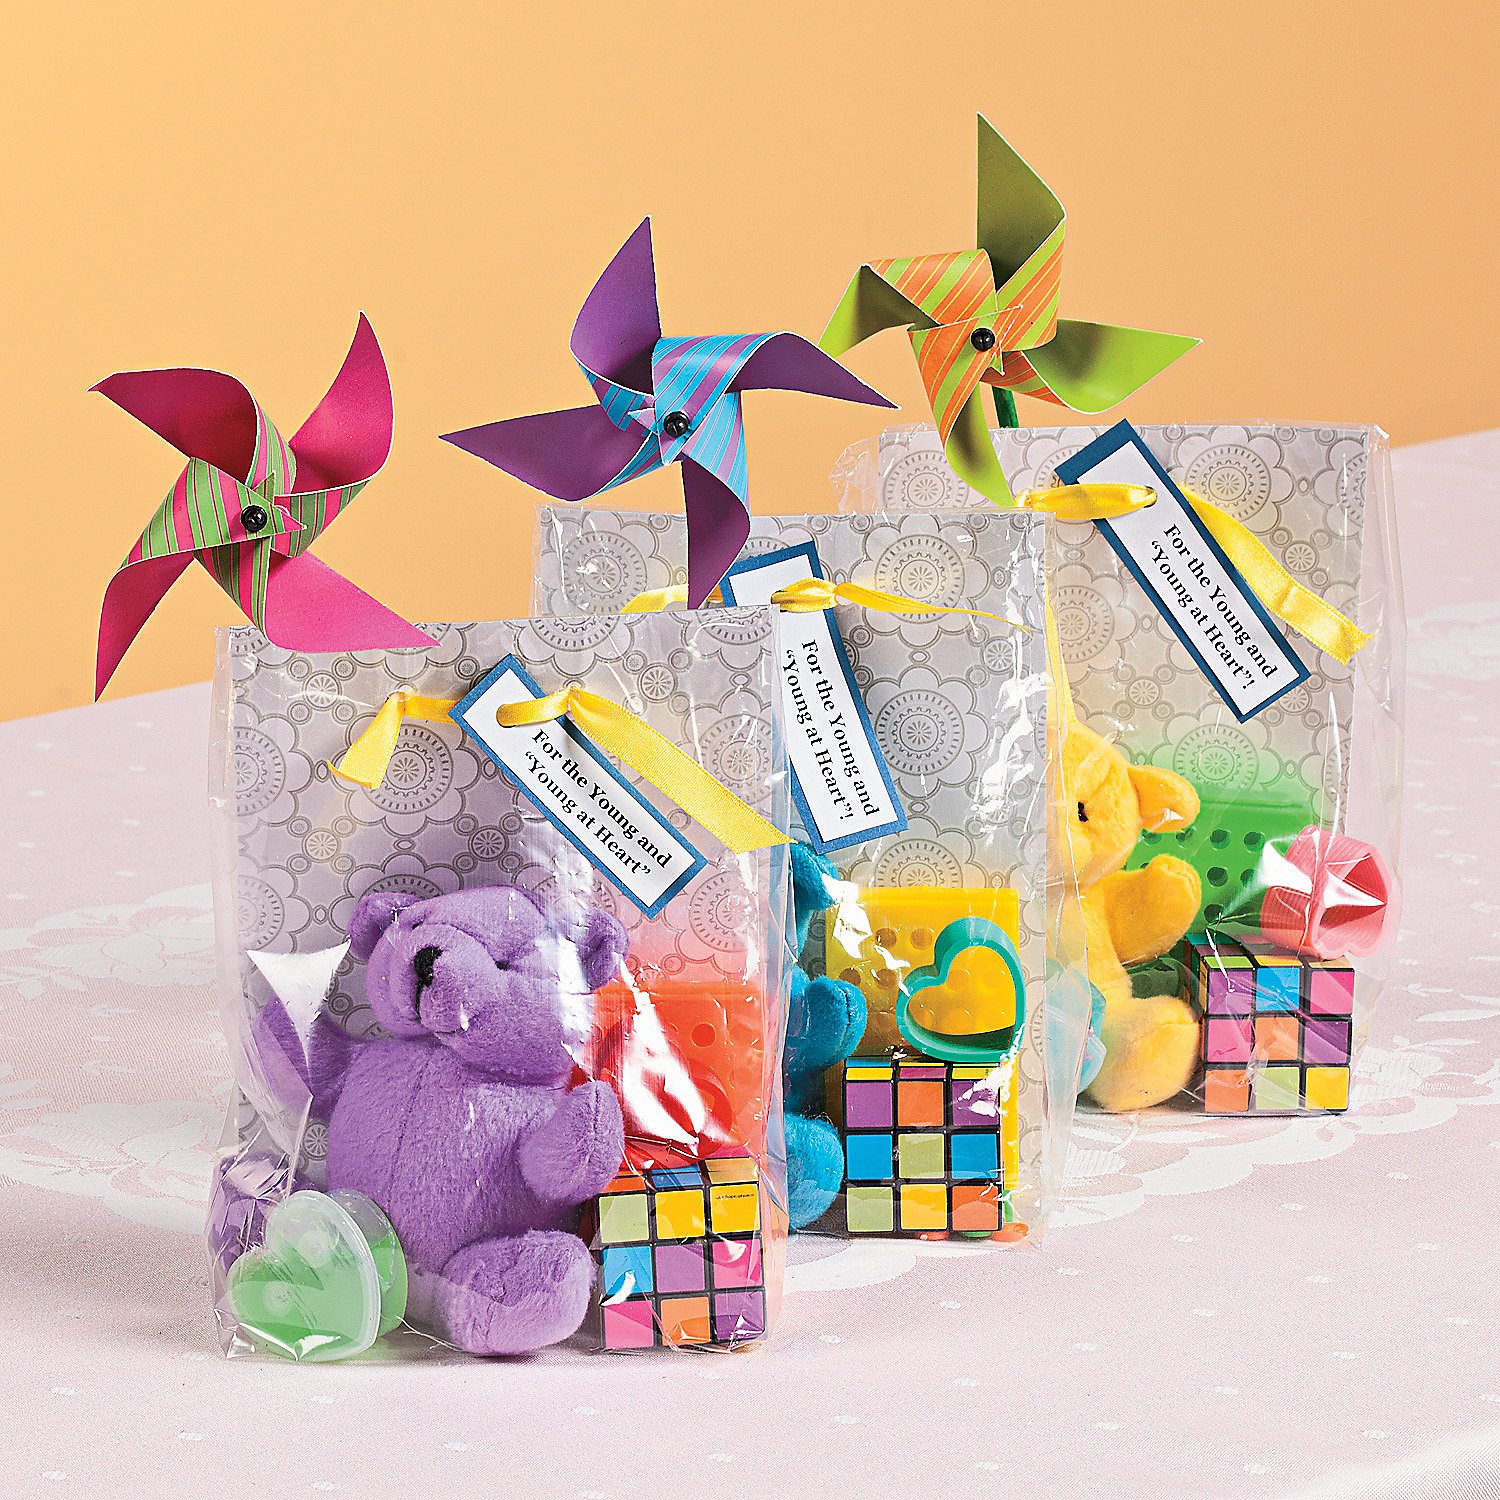 Wedding Gifts For Children
 For the Young and the “Young at Heart” Wedding Favors Idea